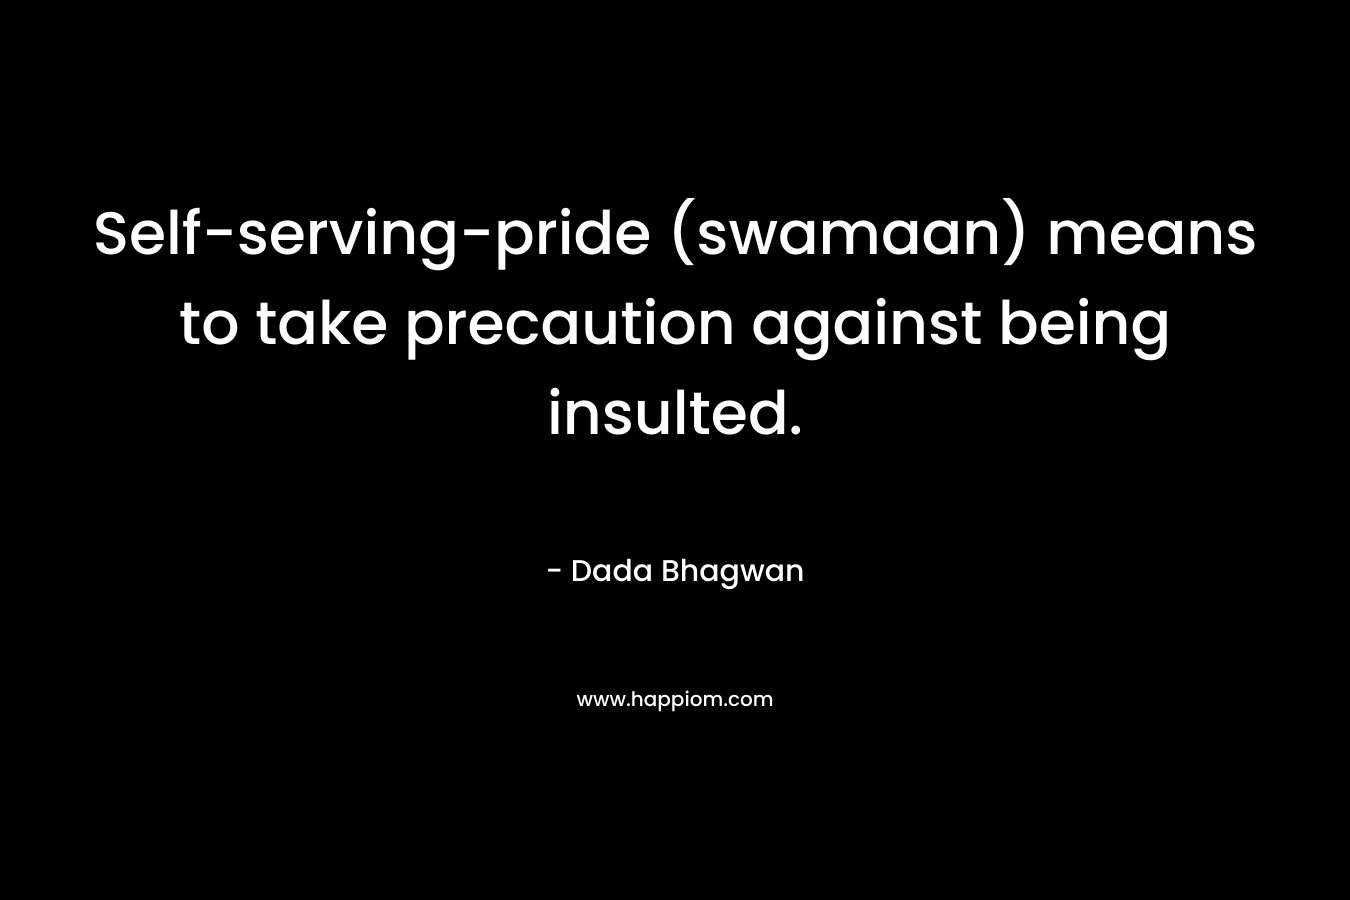 Self-serving-pride (swamaan) means to take precaution against being insulted.